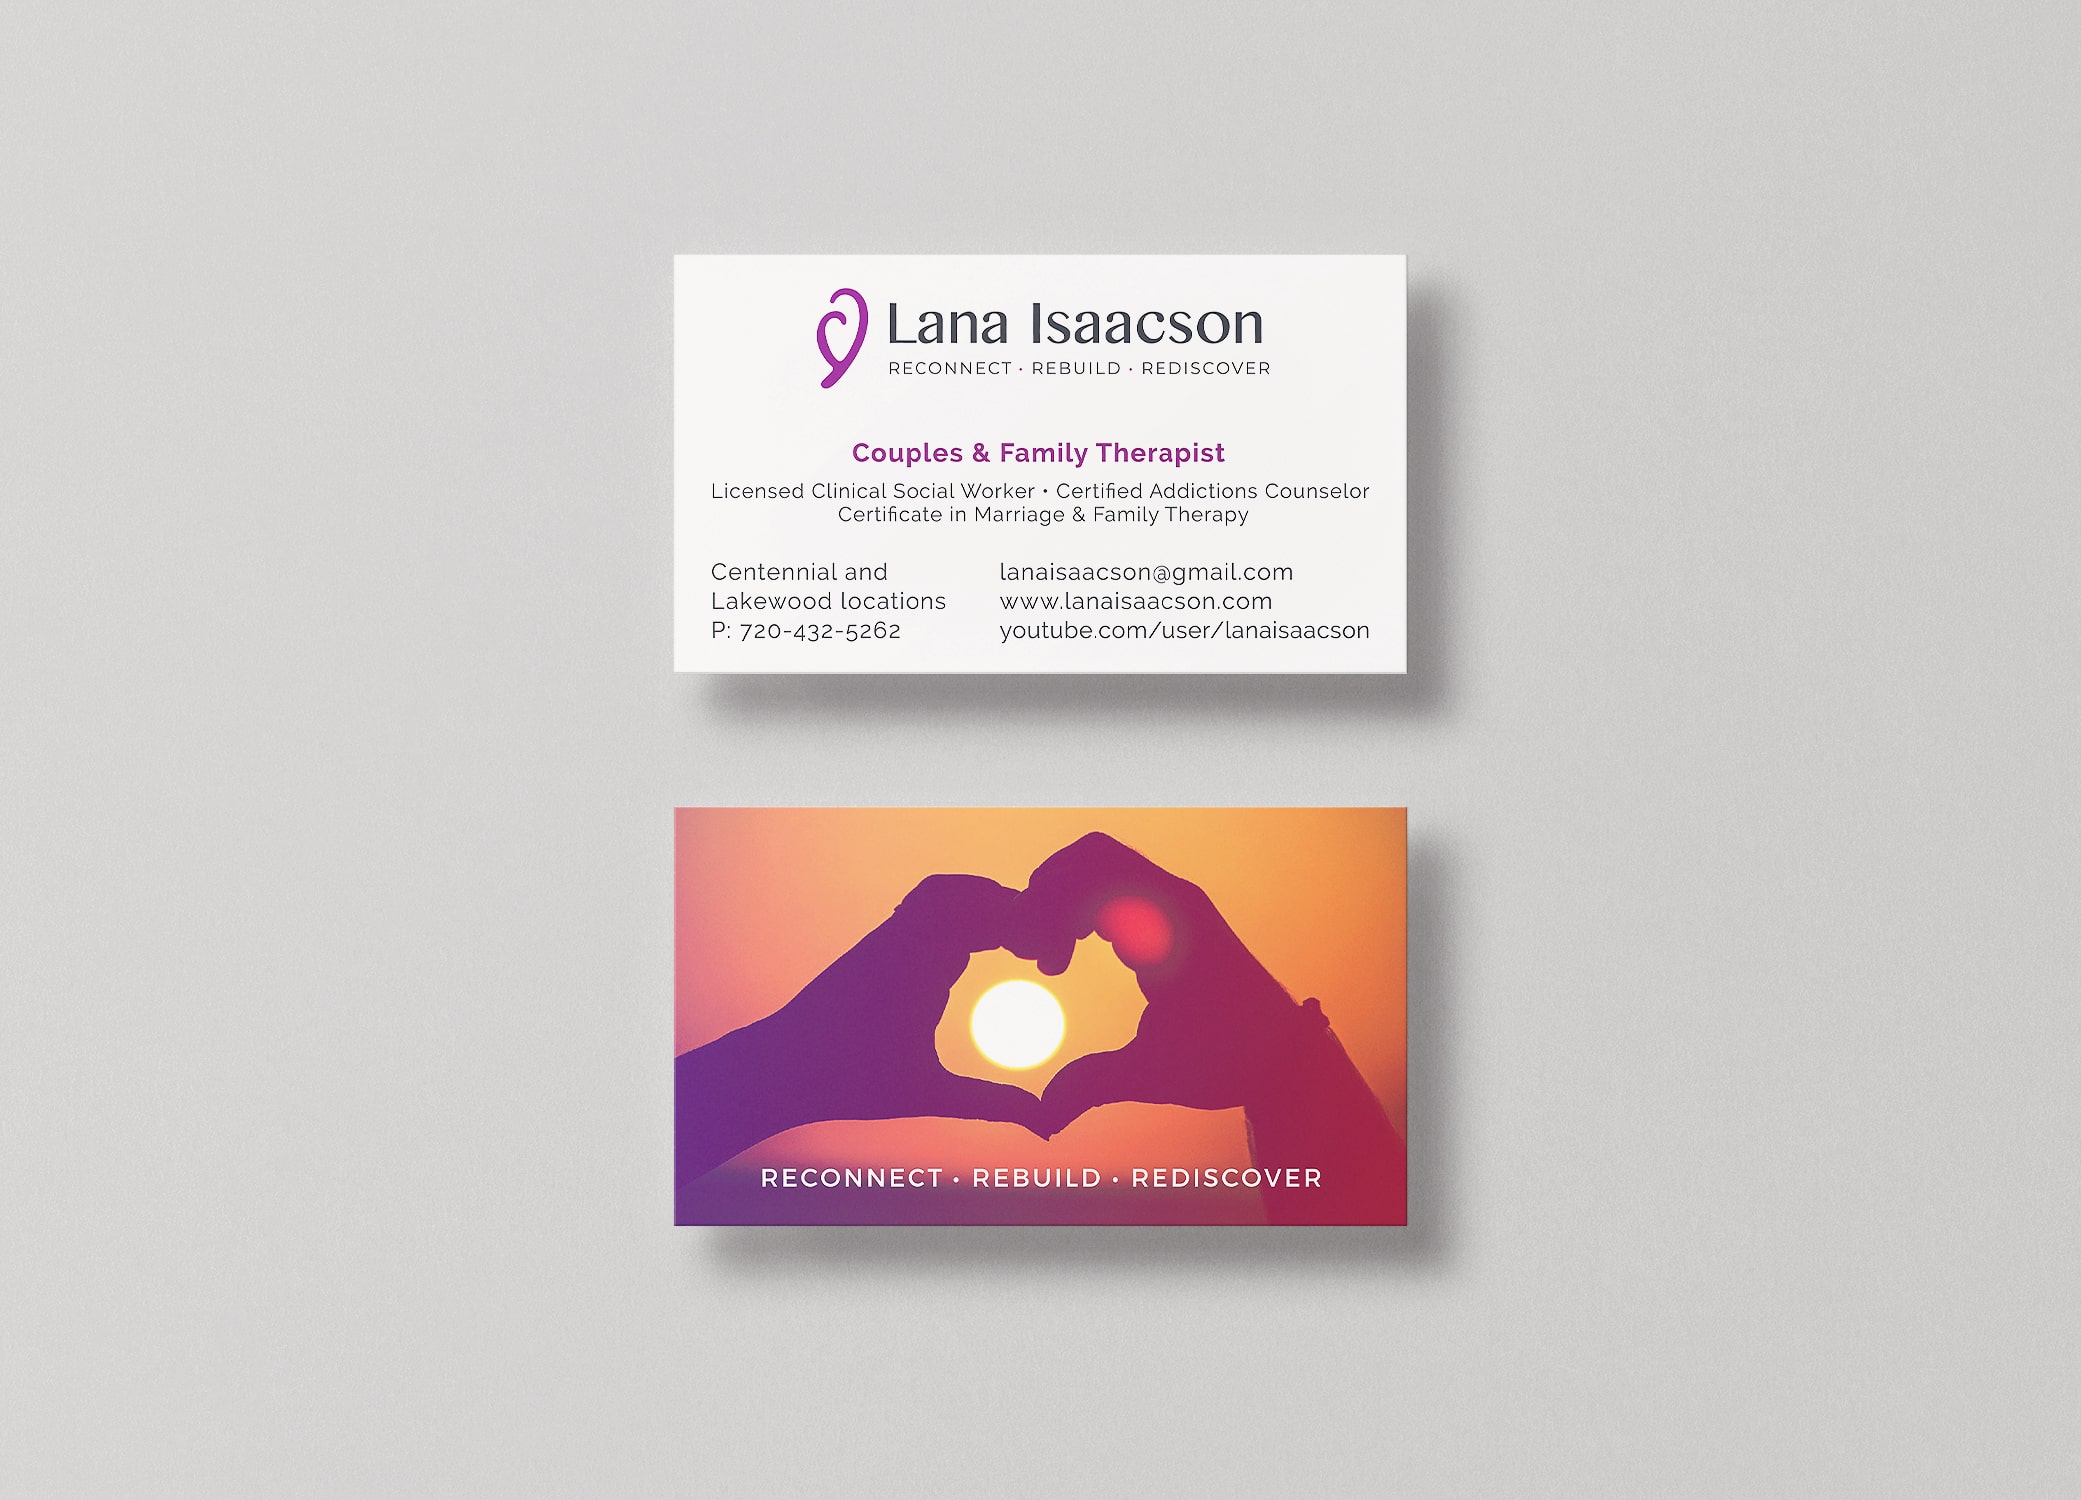 Lana Isaacson branding for therapists business cards arranged in stacks to show front and back view against a light grey backdrop.